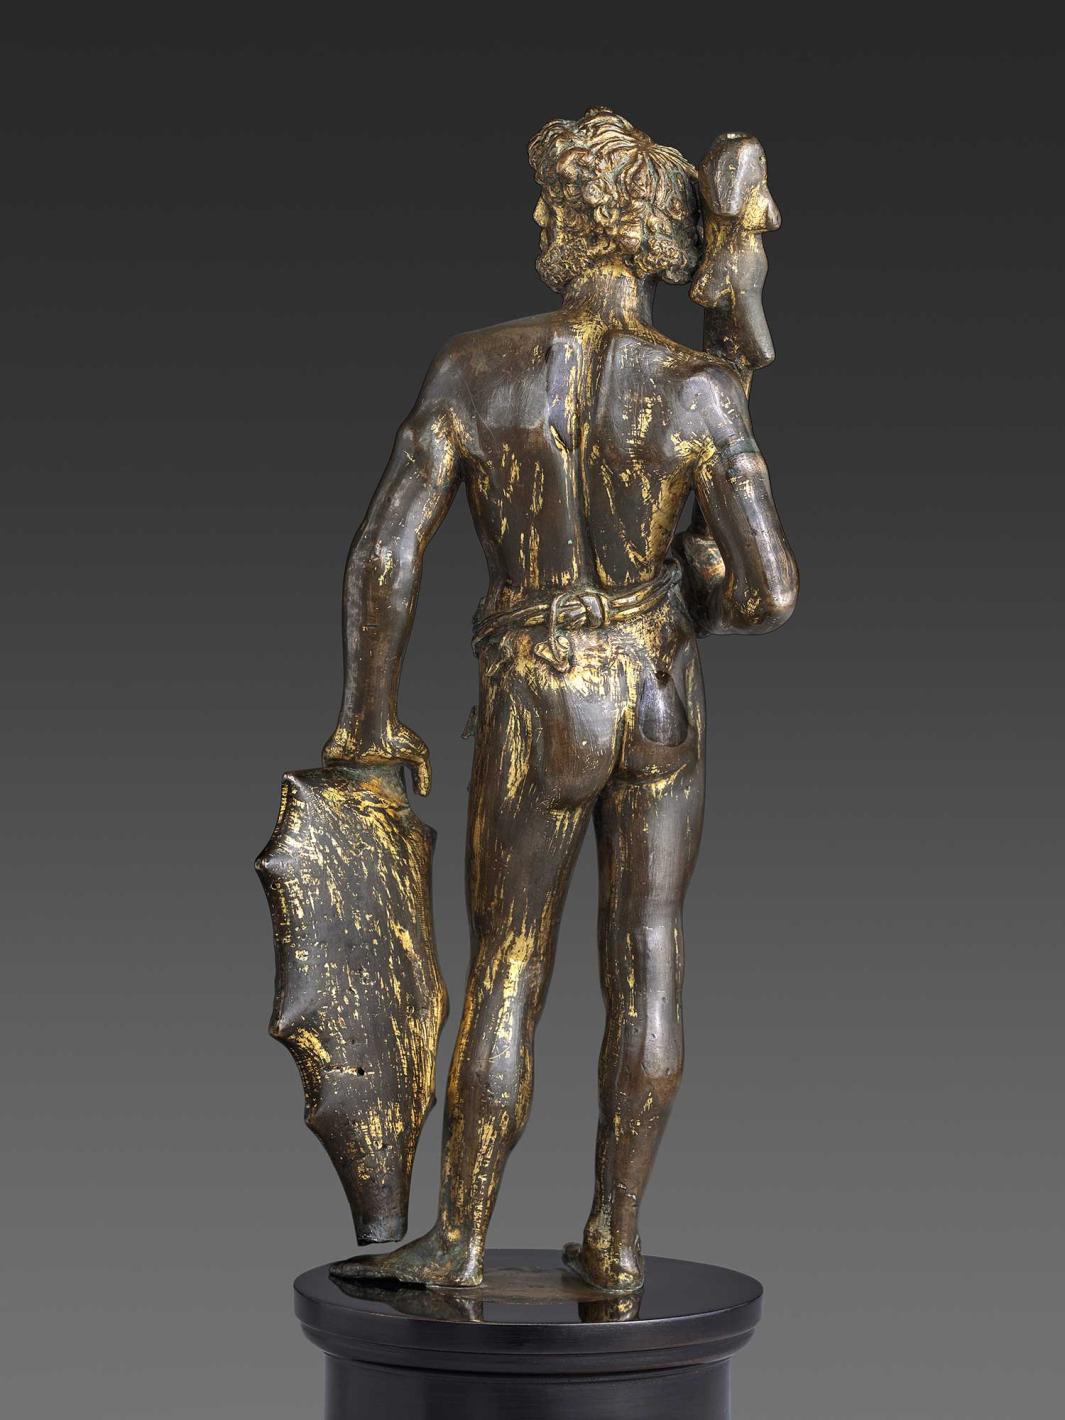 Bronze statuette of a man holding a shield and a club, as seen from the back.